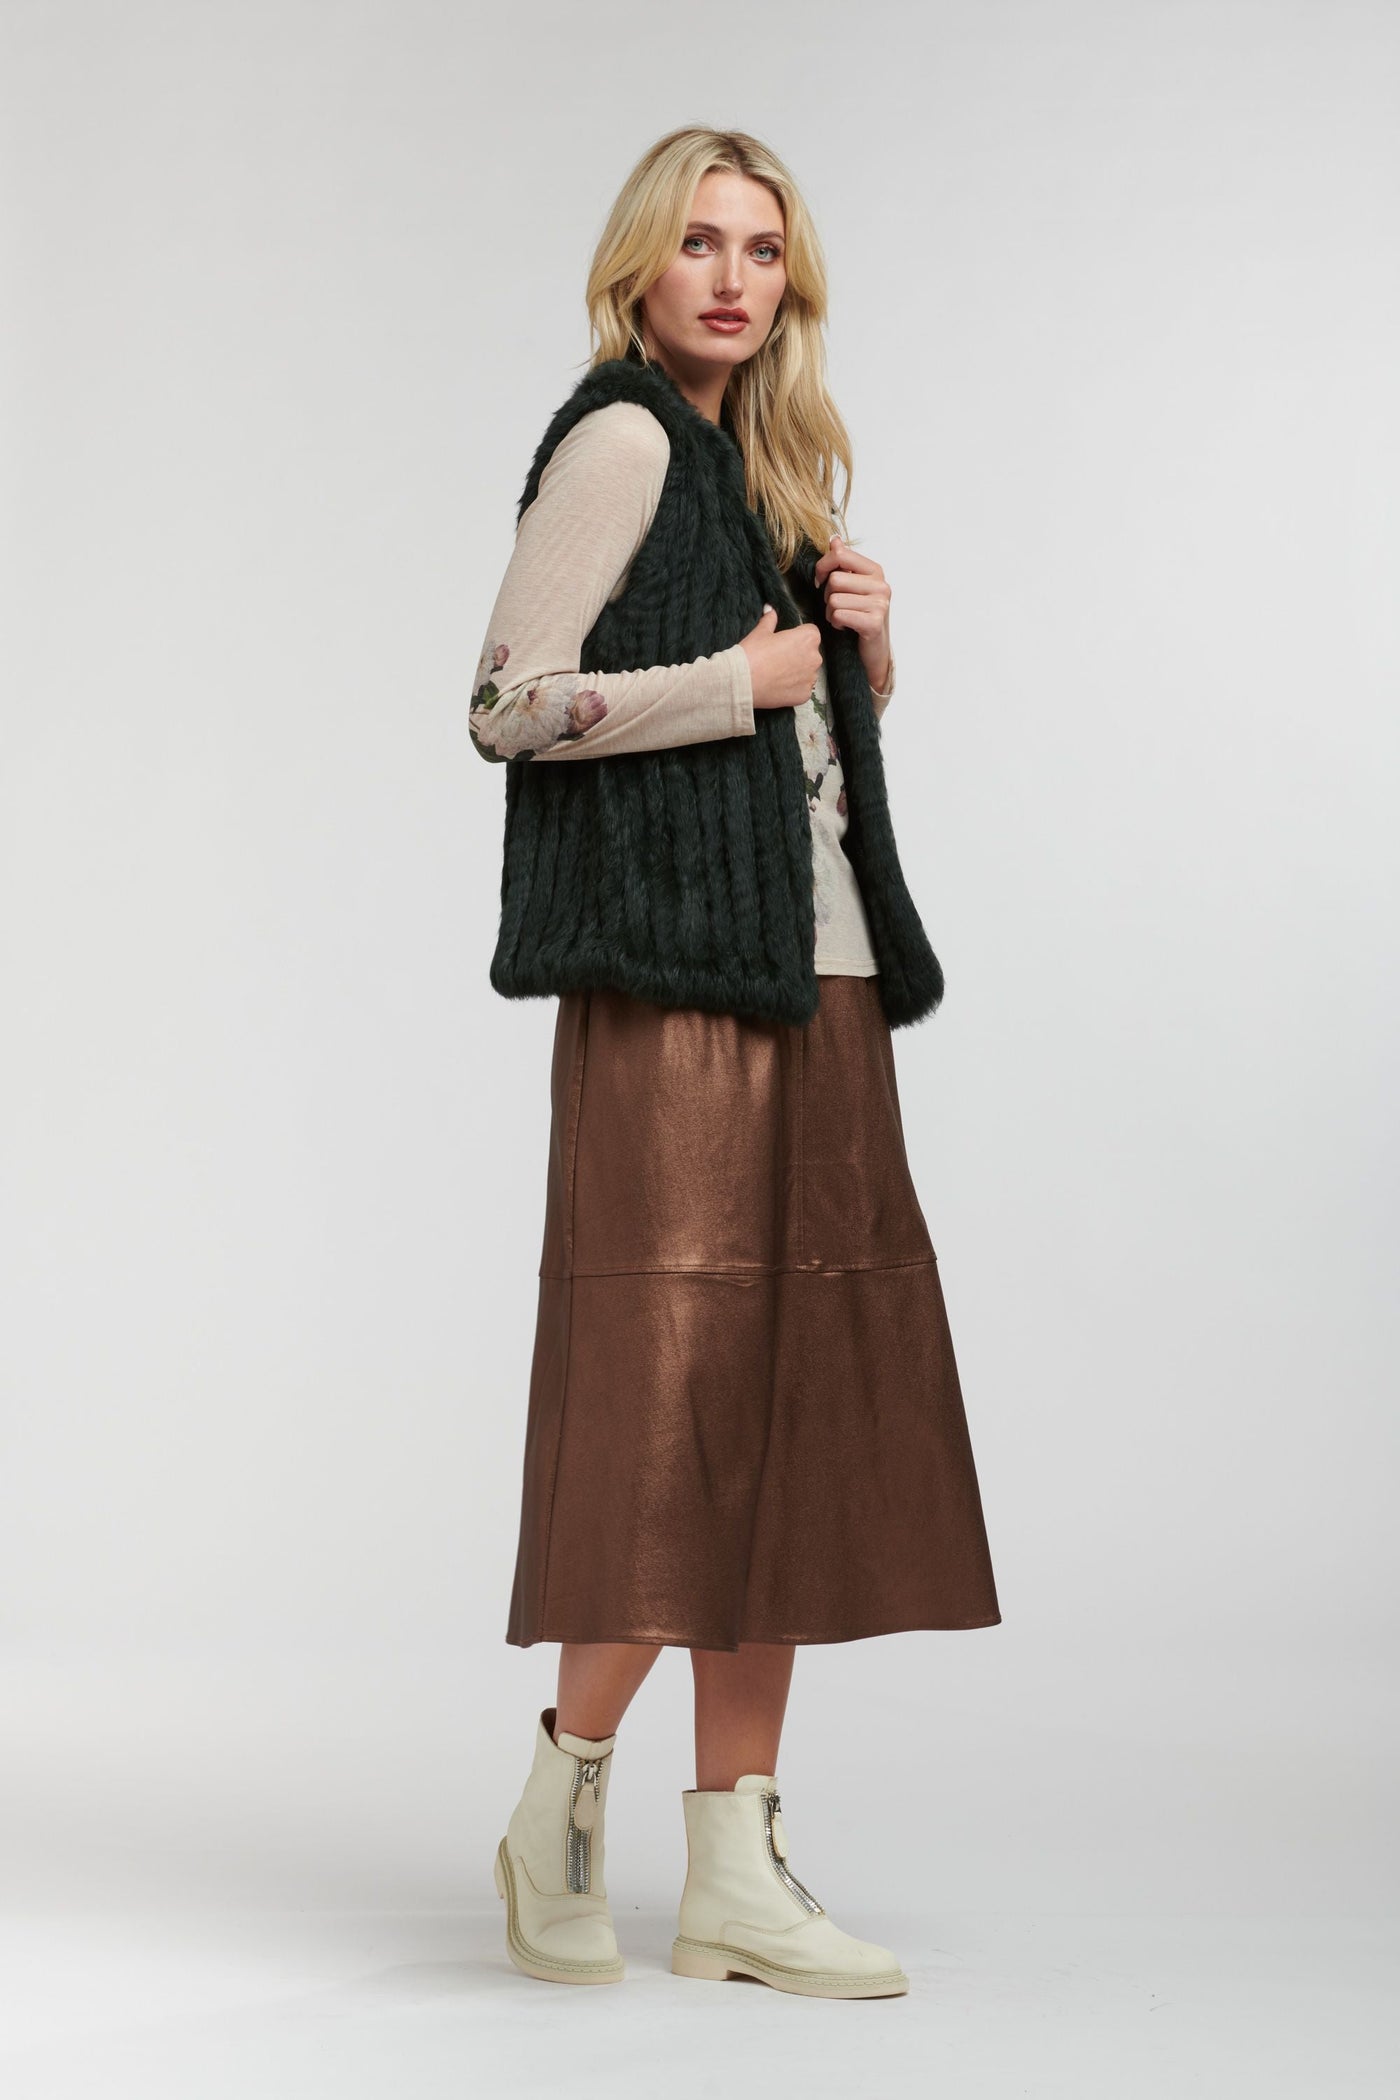 Shine Your Way Skirt - Copper-365 Days-Lima & Co